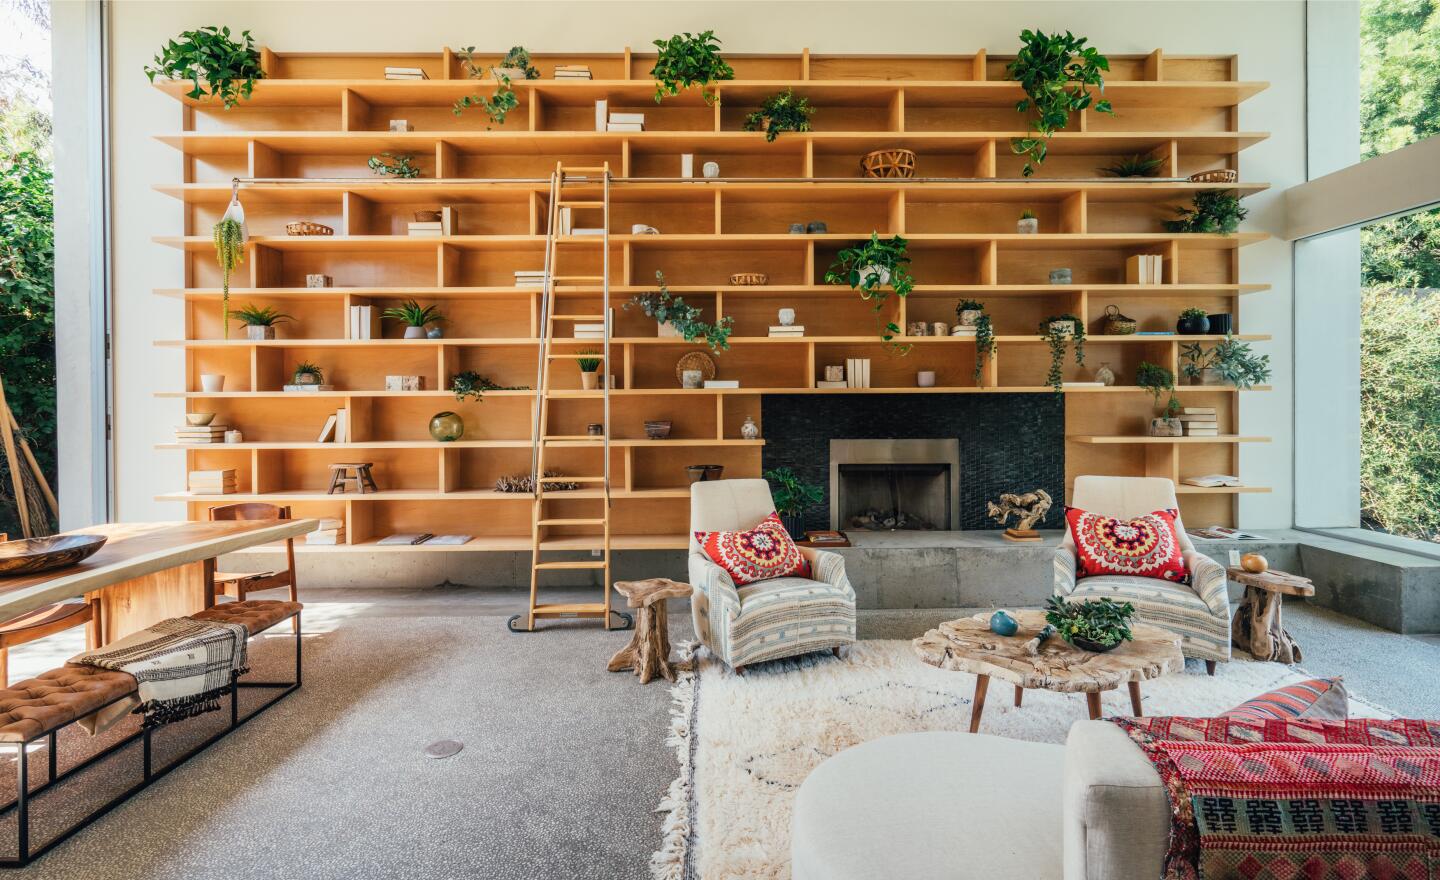 The built-in shelves along one wall have a ladder and living room furniture in front of them.